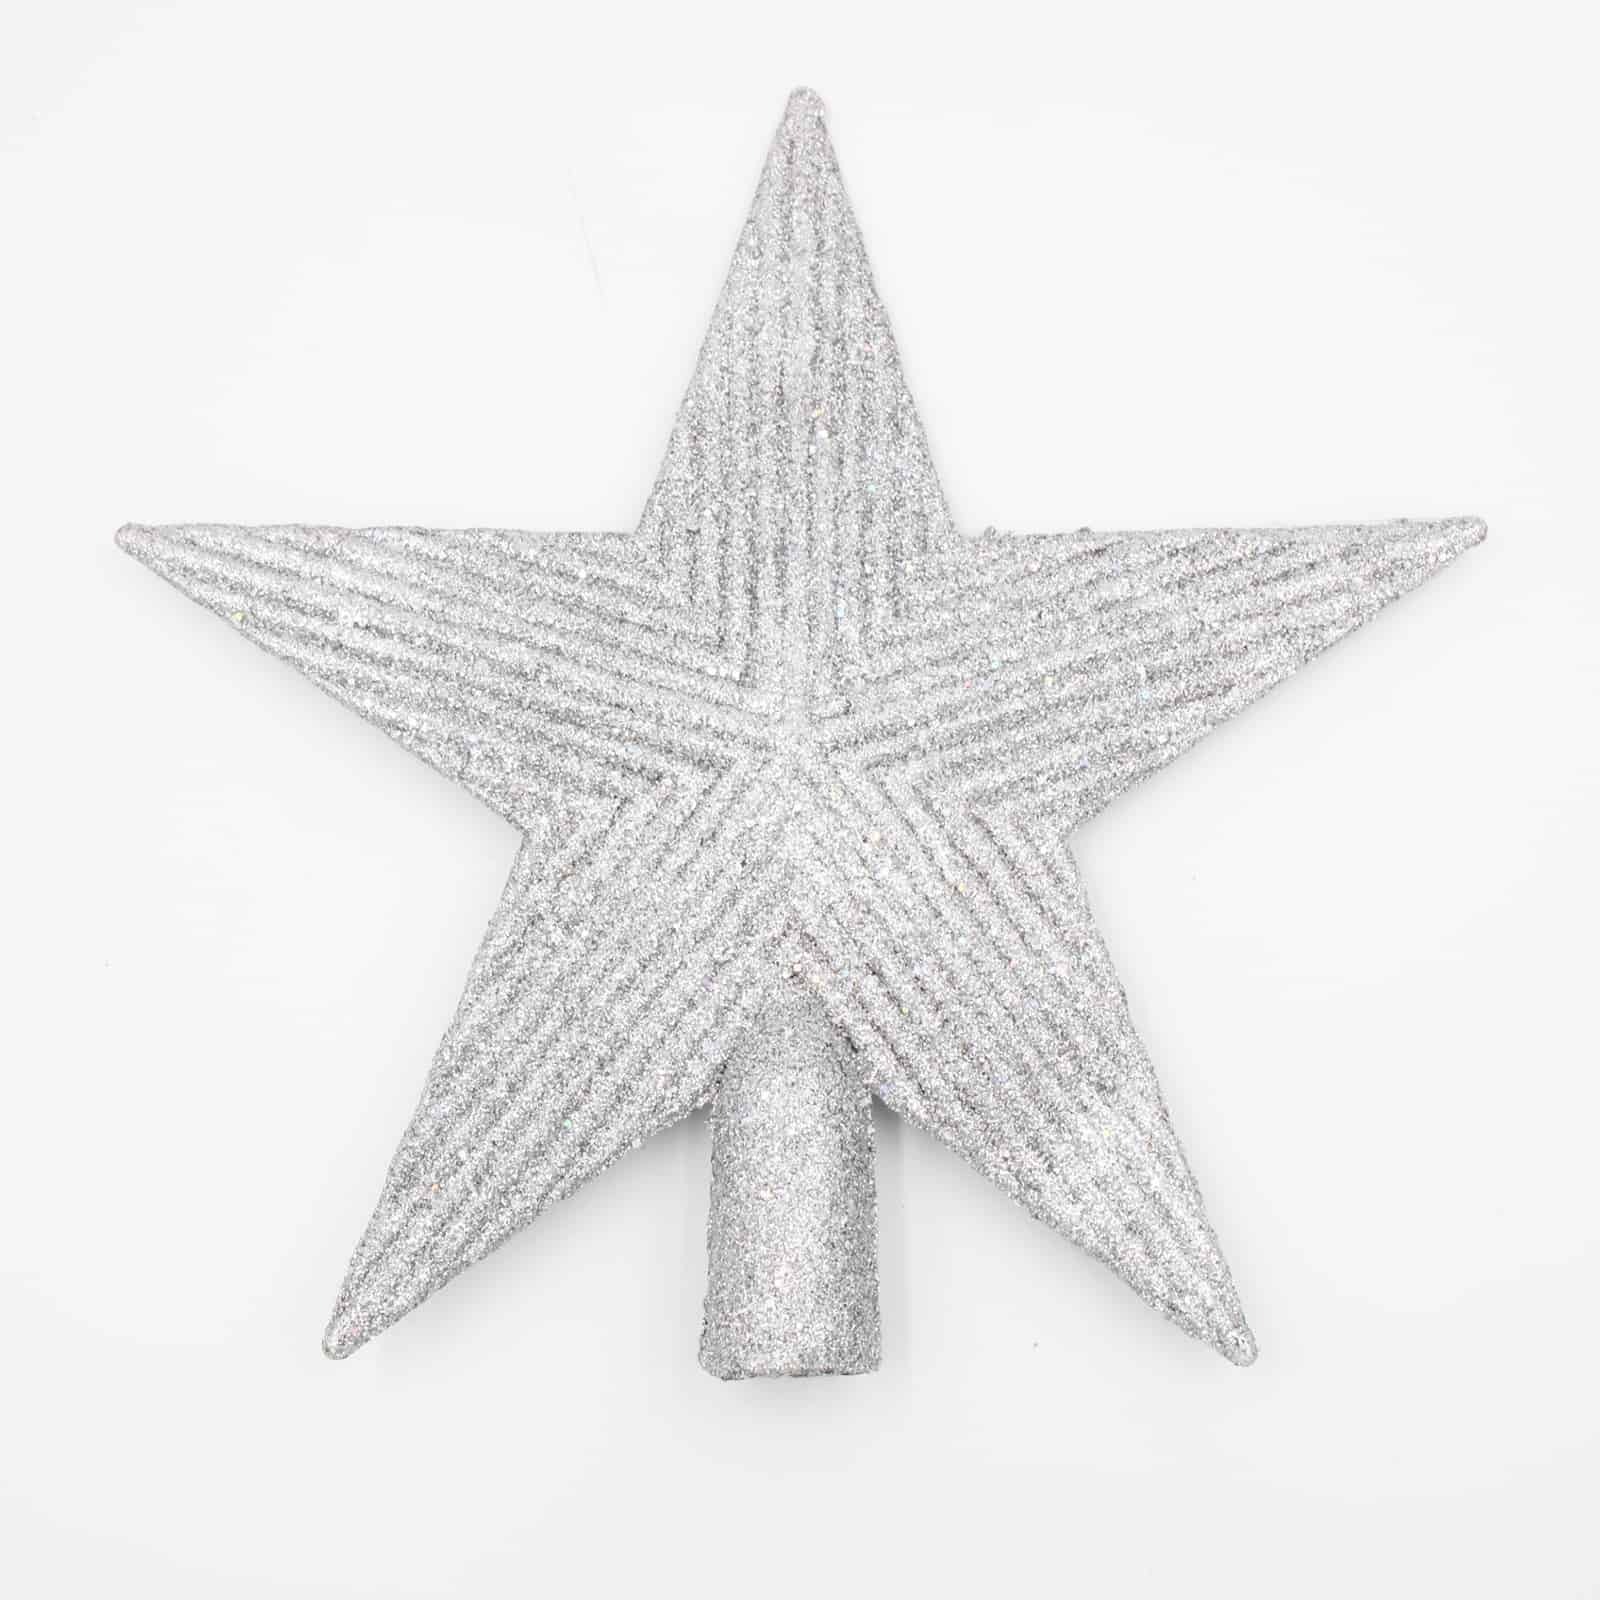 LARGE SILVER TREE TOPPER STAR 195mm